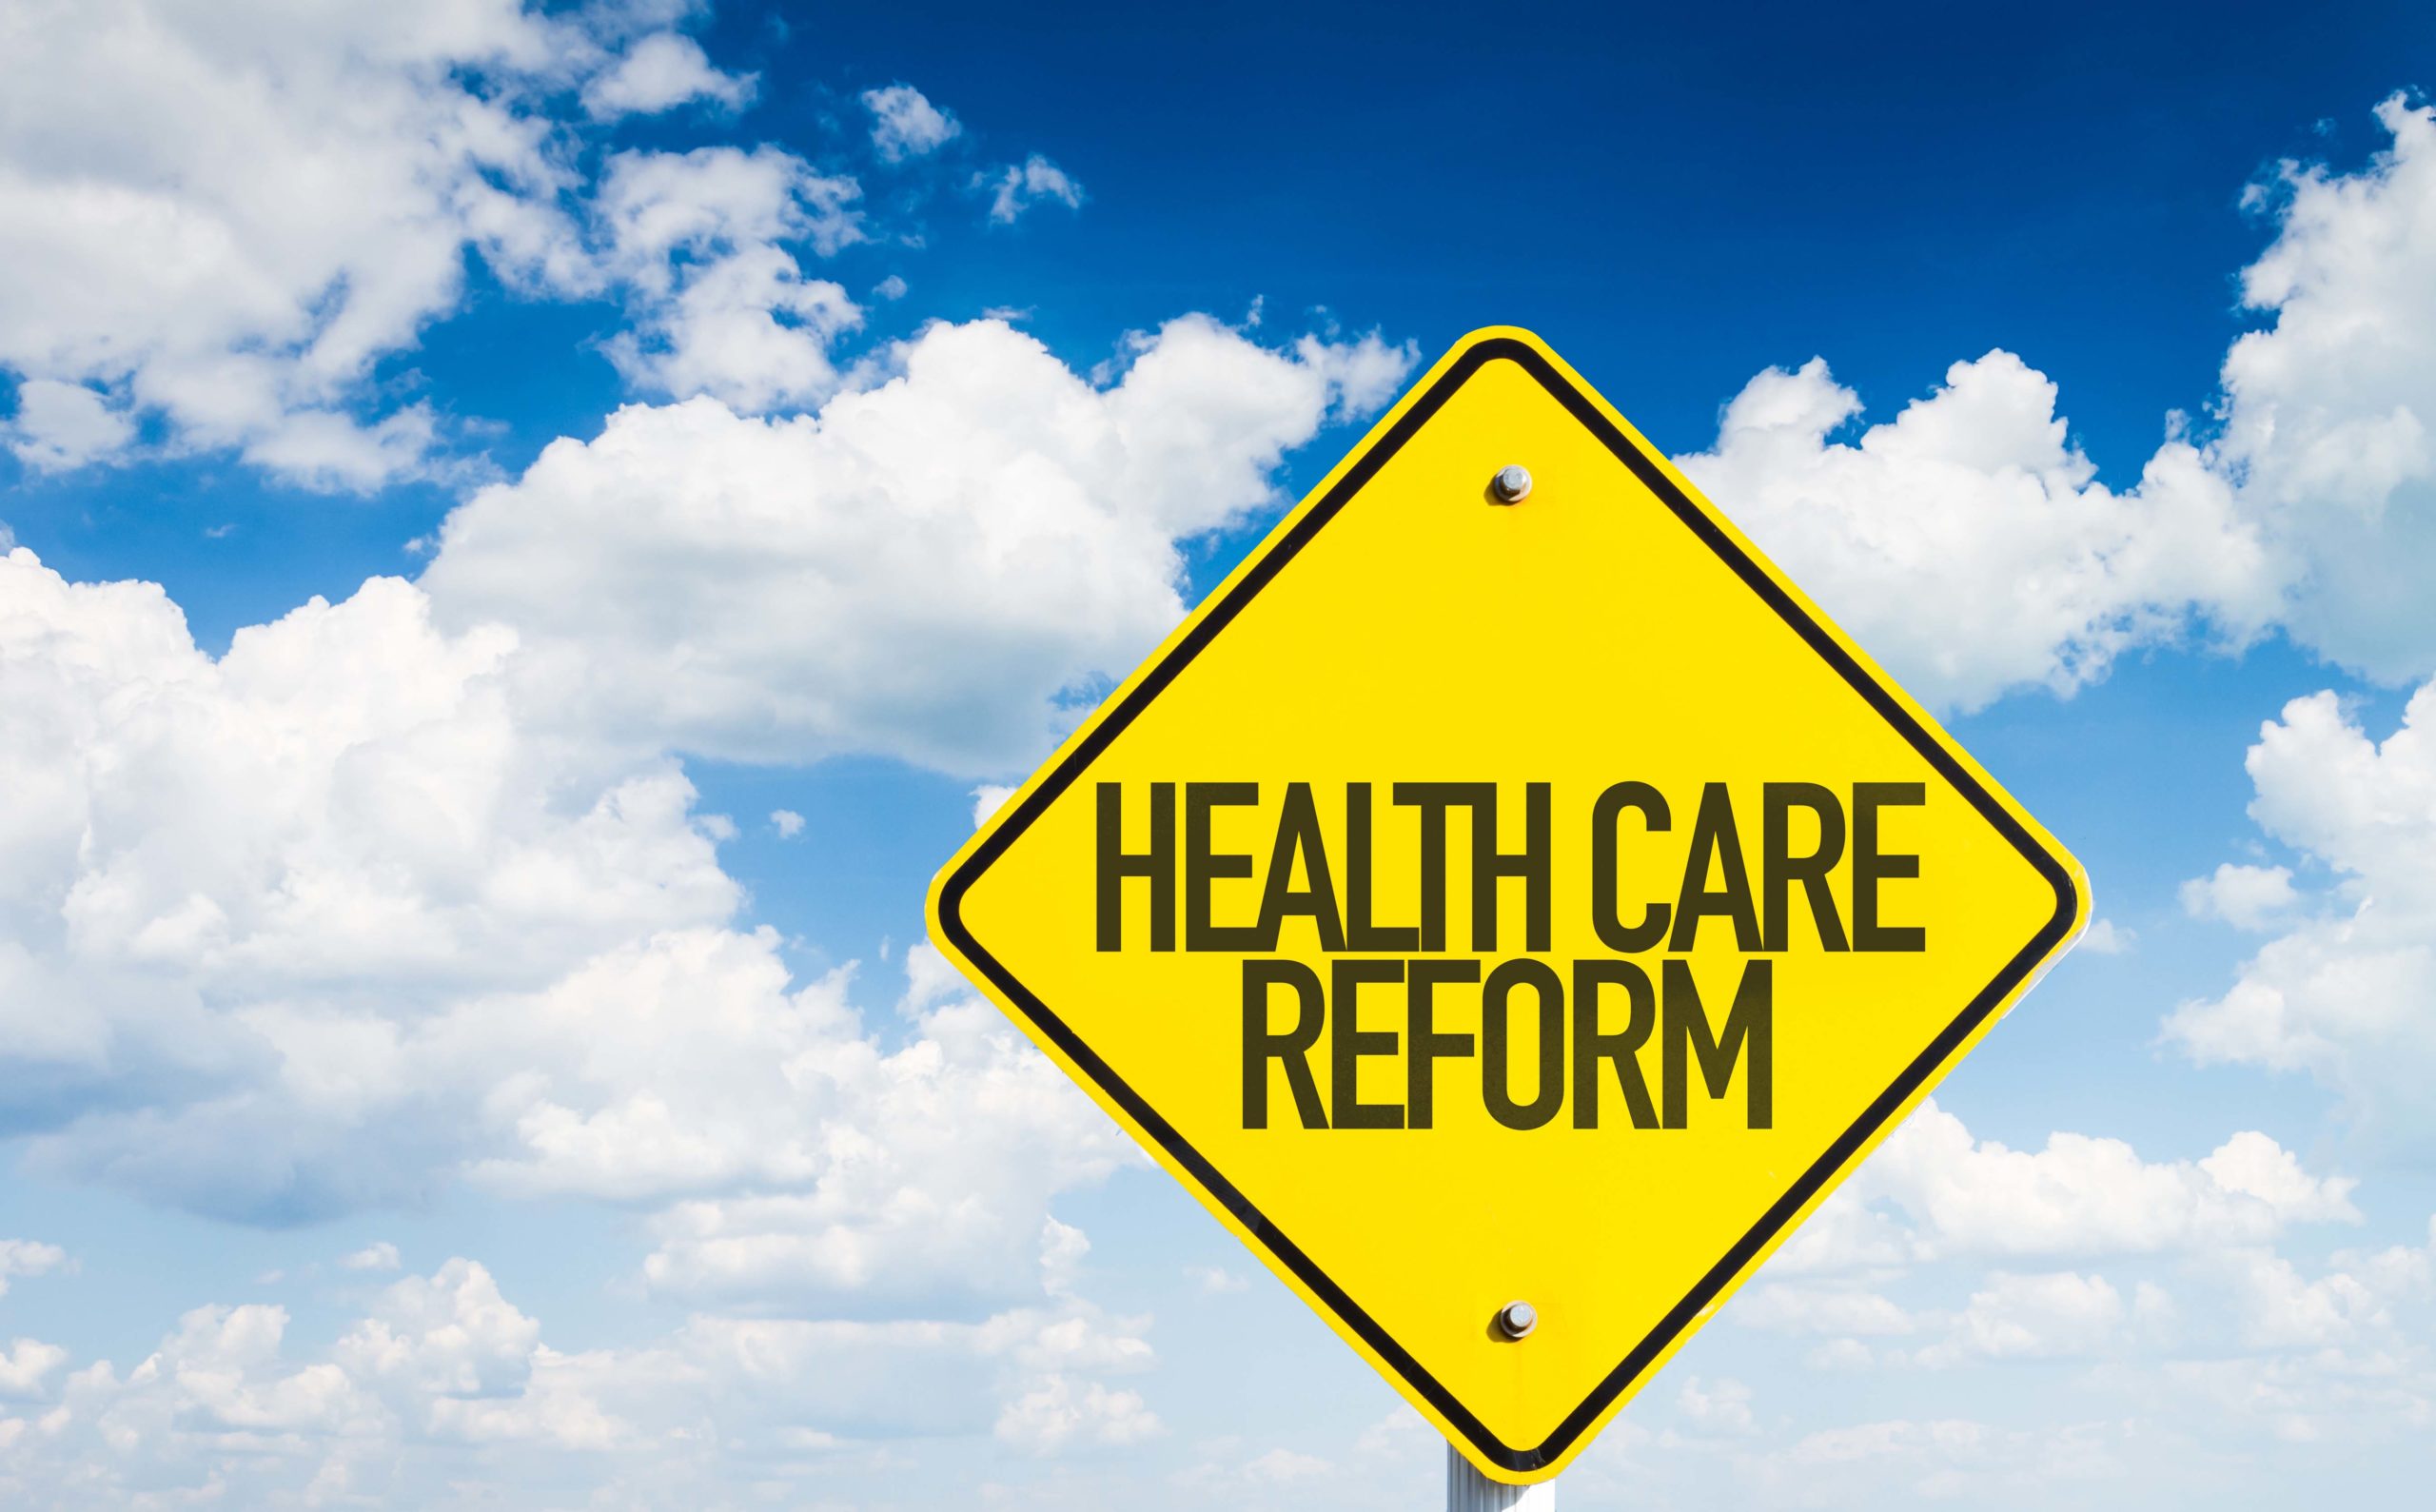 Health Care Reform sign with sky background